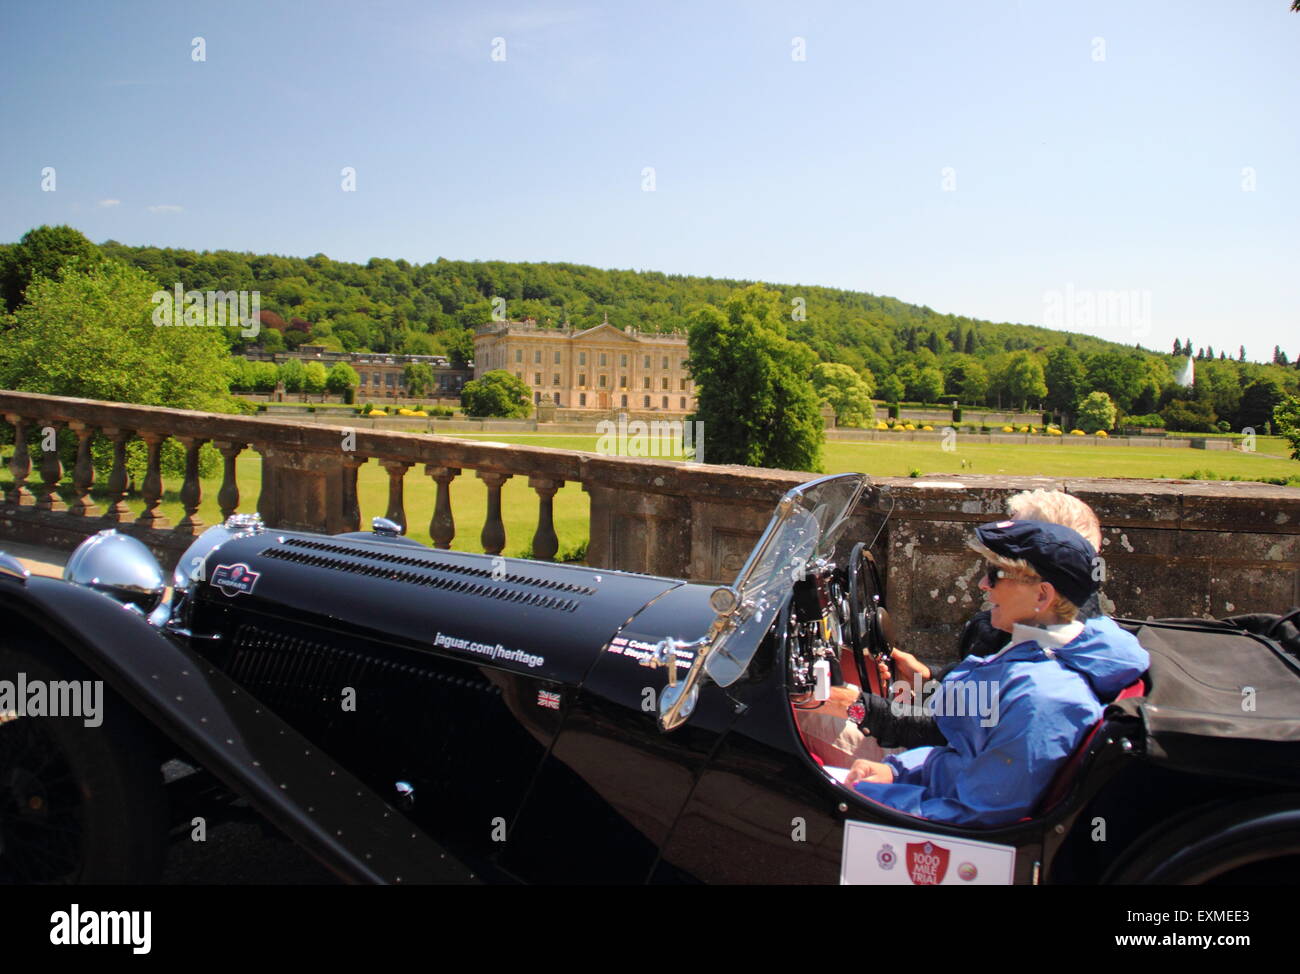 Peak District, Derbyshire, UK. 15 July 2015. The Royal Automobile Club 1000 Mile Trail 2015 passes through the parkland surrounding Chatsworth House (pictured) in the Peak District, Derbyshire on a glorious summer day. Credit:  Deborah Vernon/Alamy Live News Stock Photo